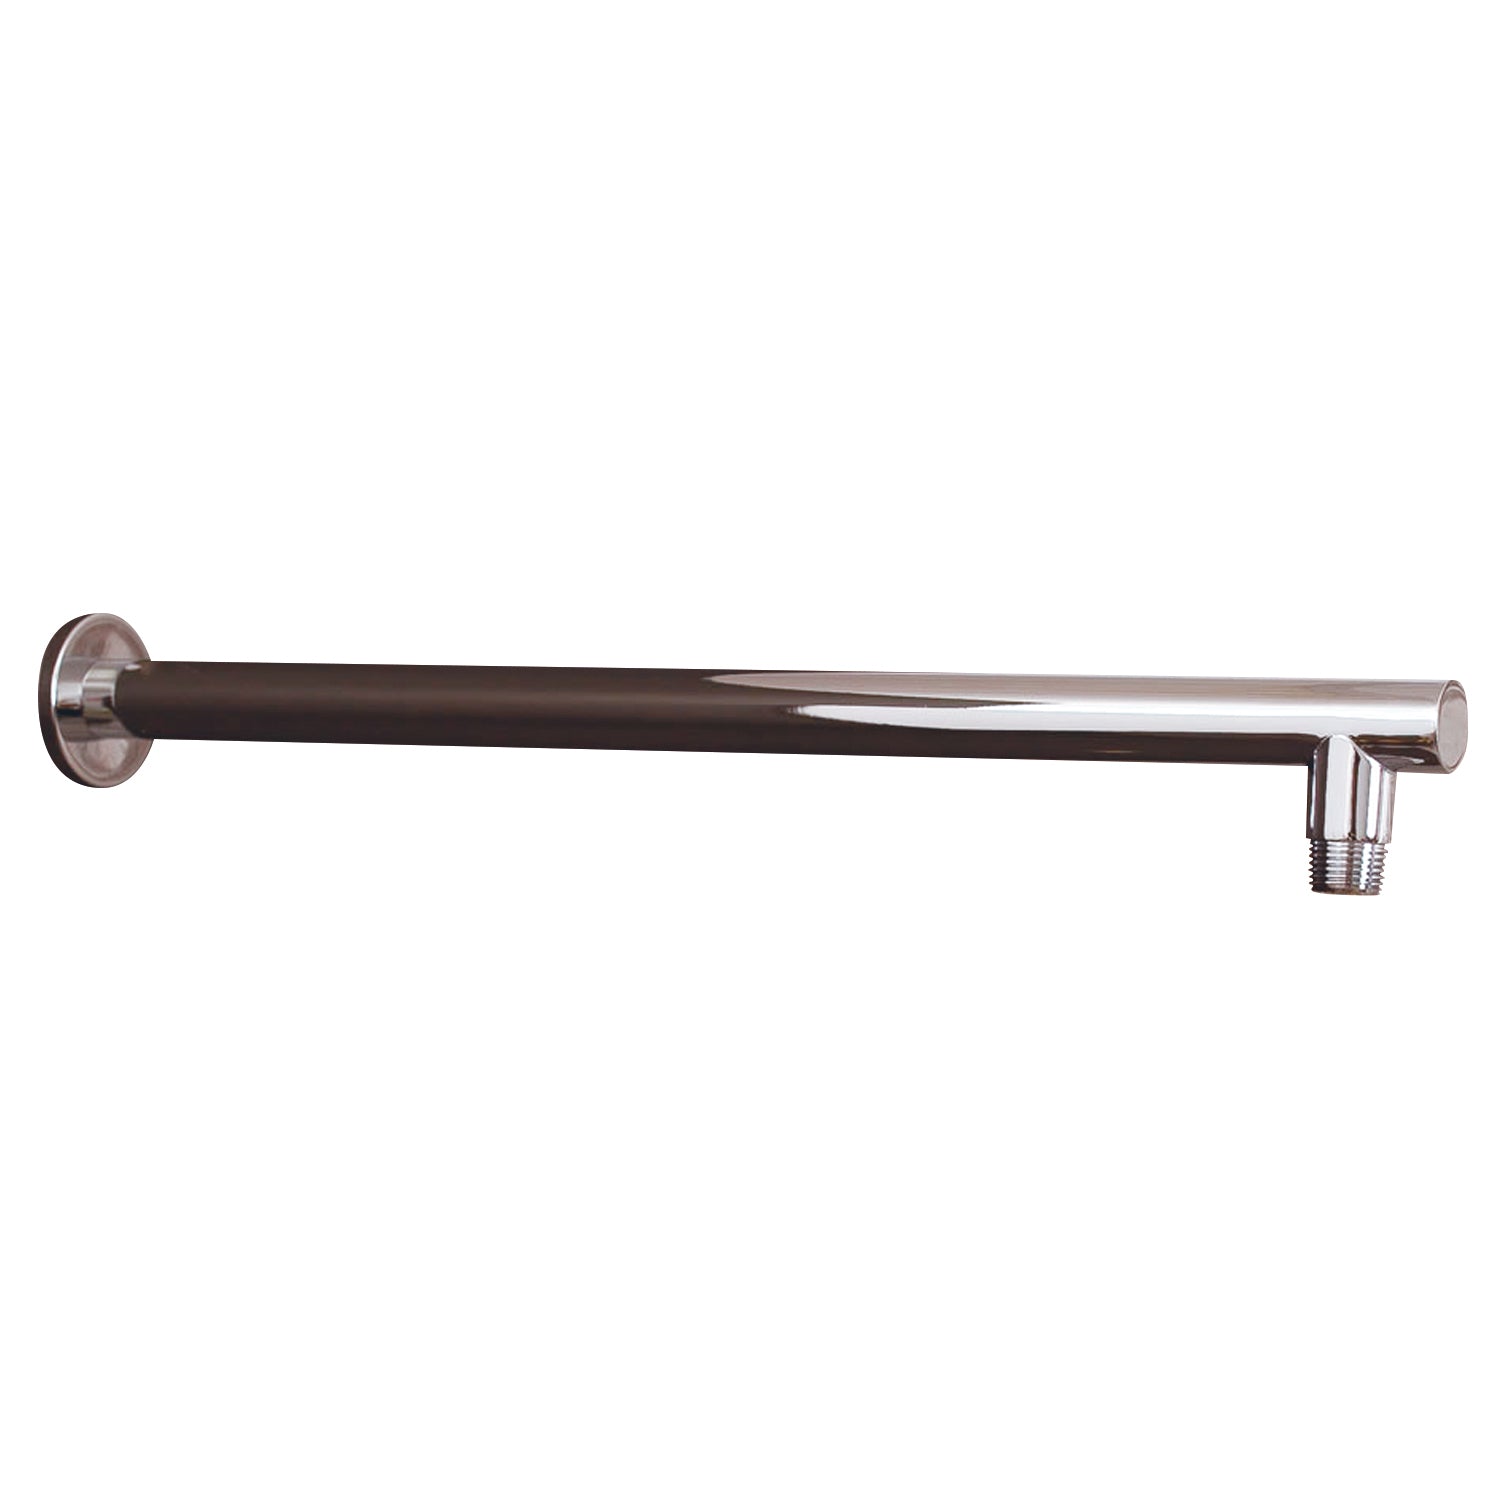 DAX Round Shower Arm, Spout, Brass Body, Wall Mount, Chrome Finish, 18 Inches (D-F04-18-CR)